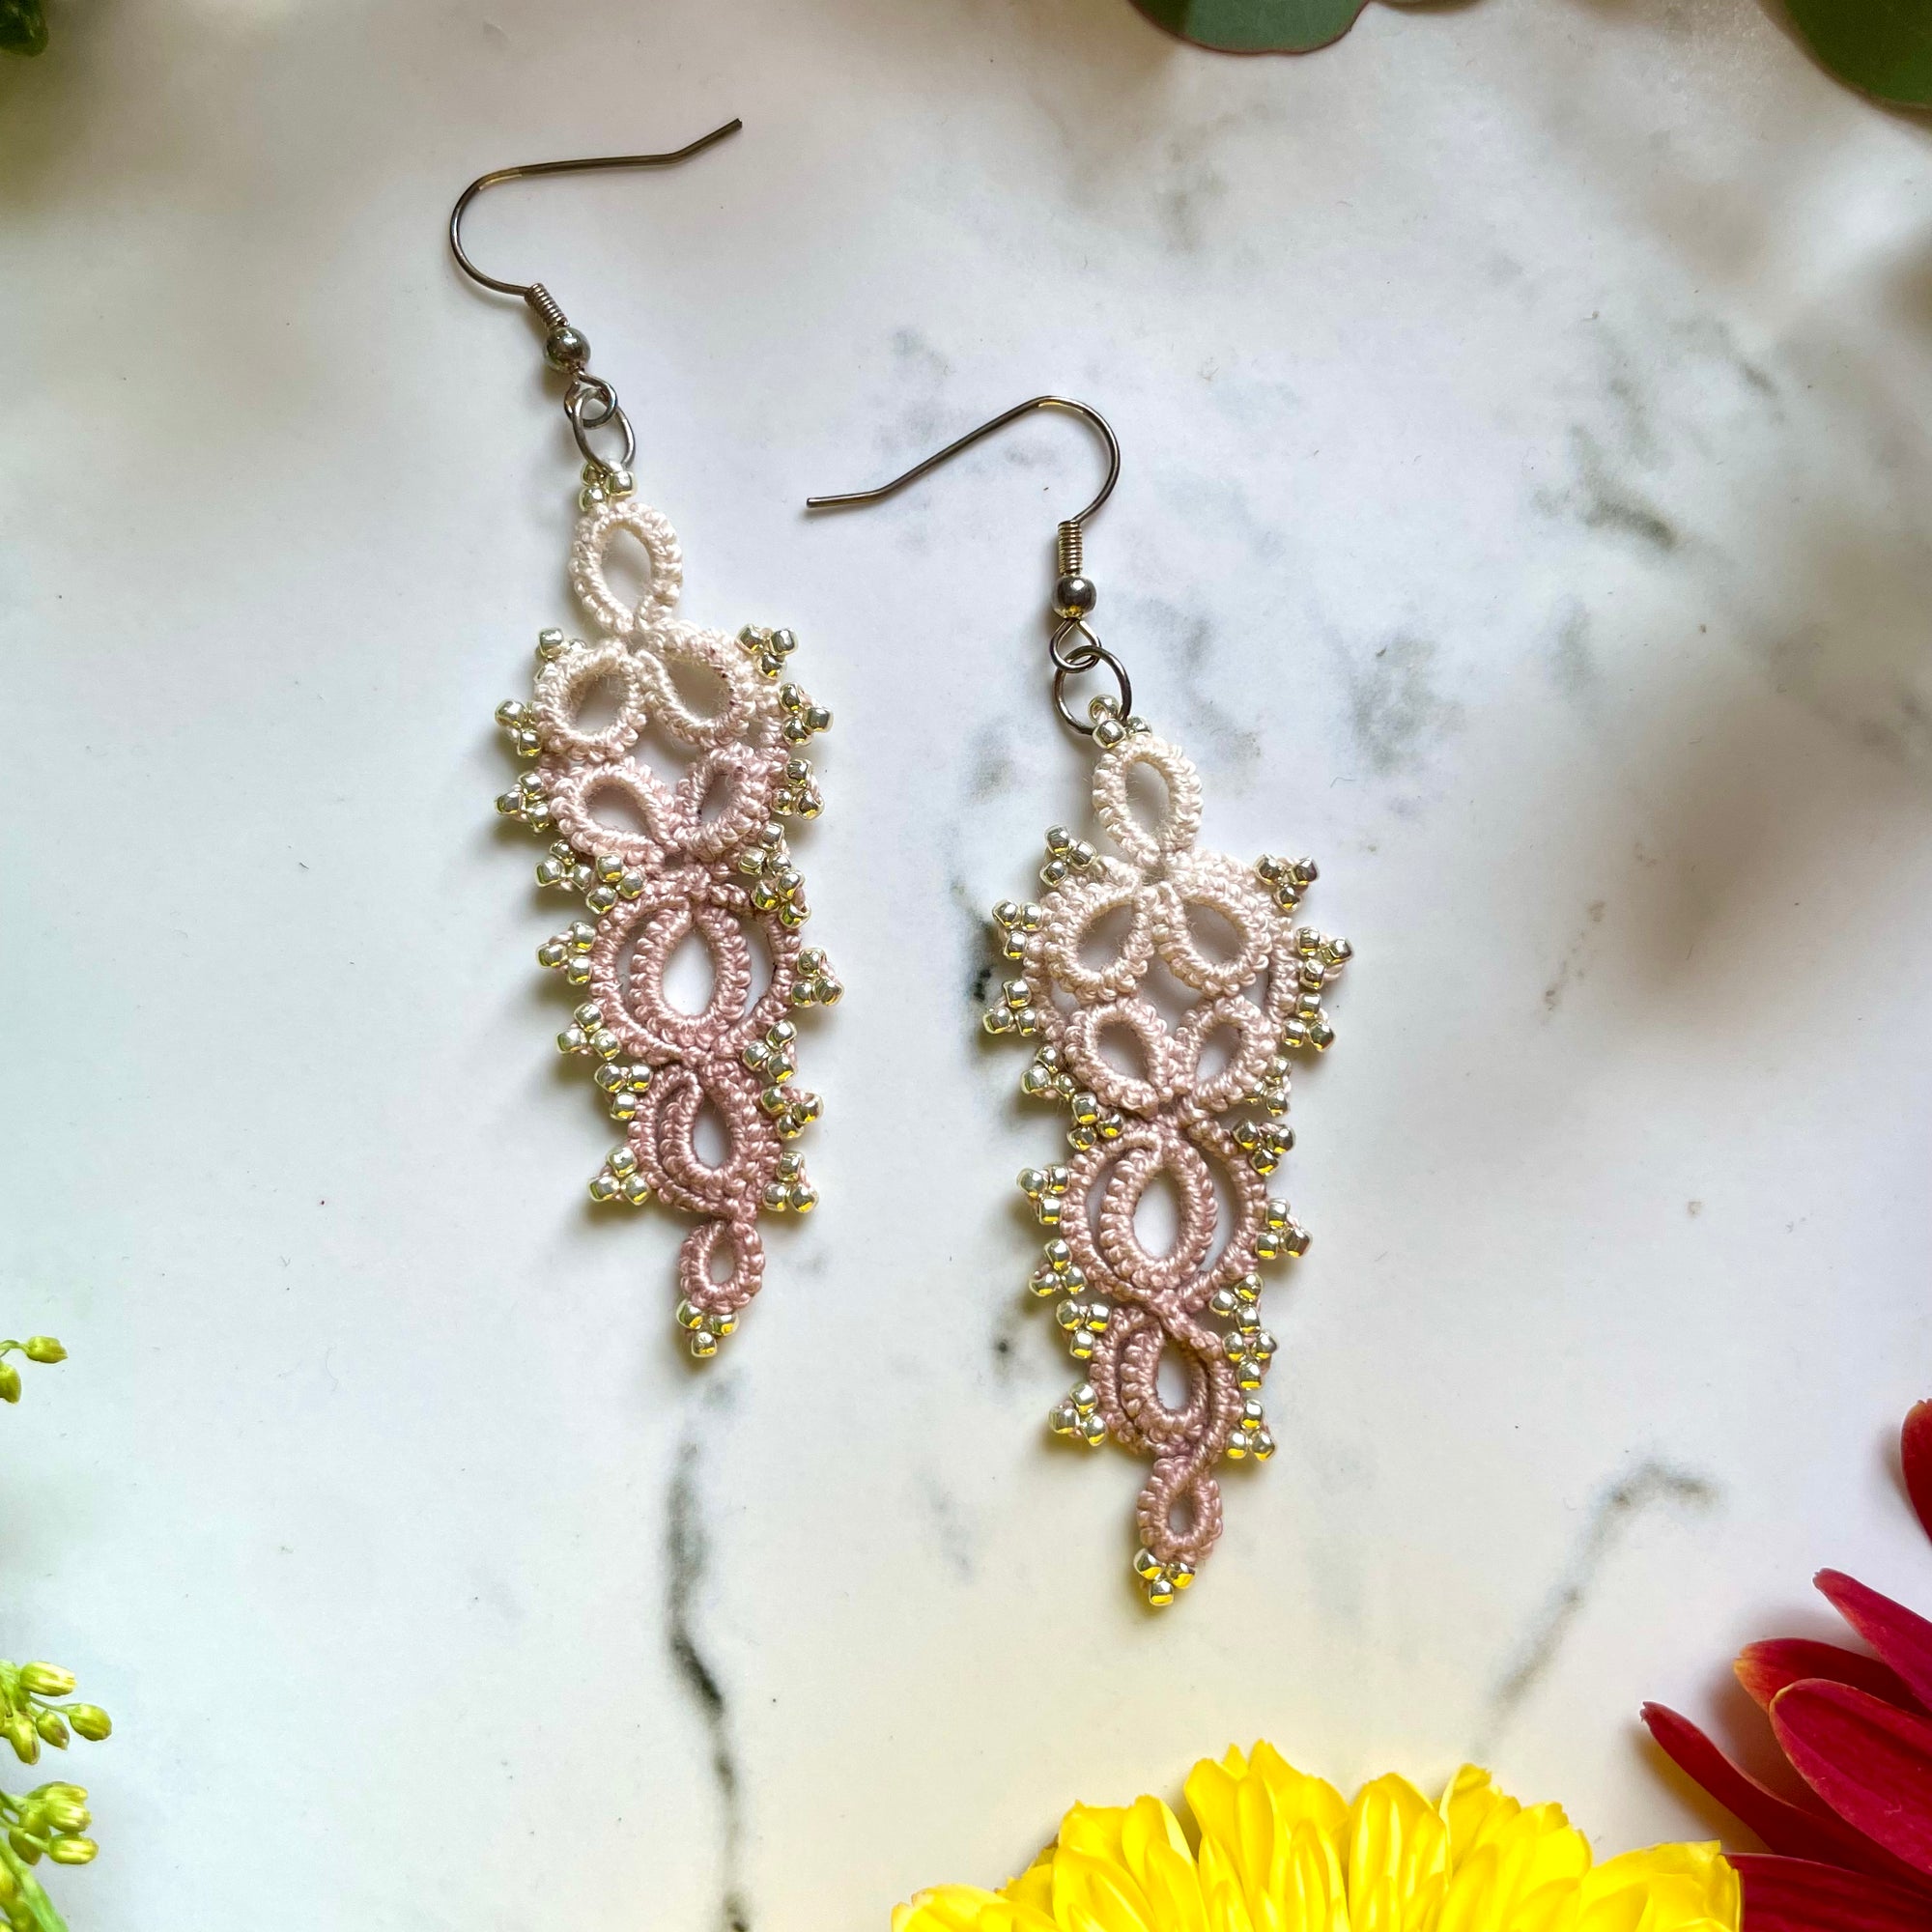 Tan to Brown Ombré Tatted Lace Earrings